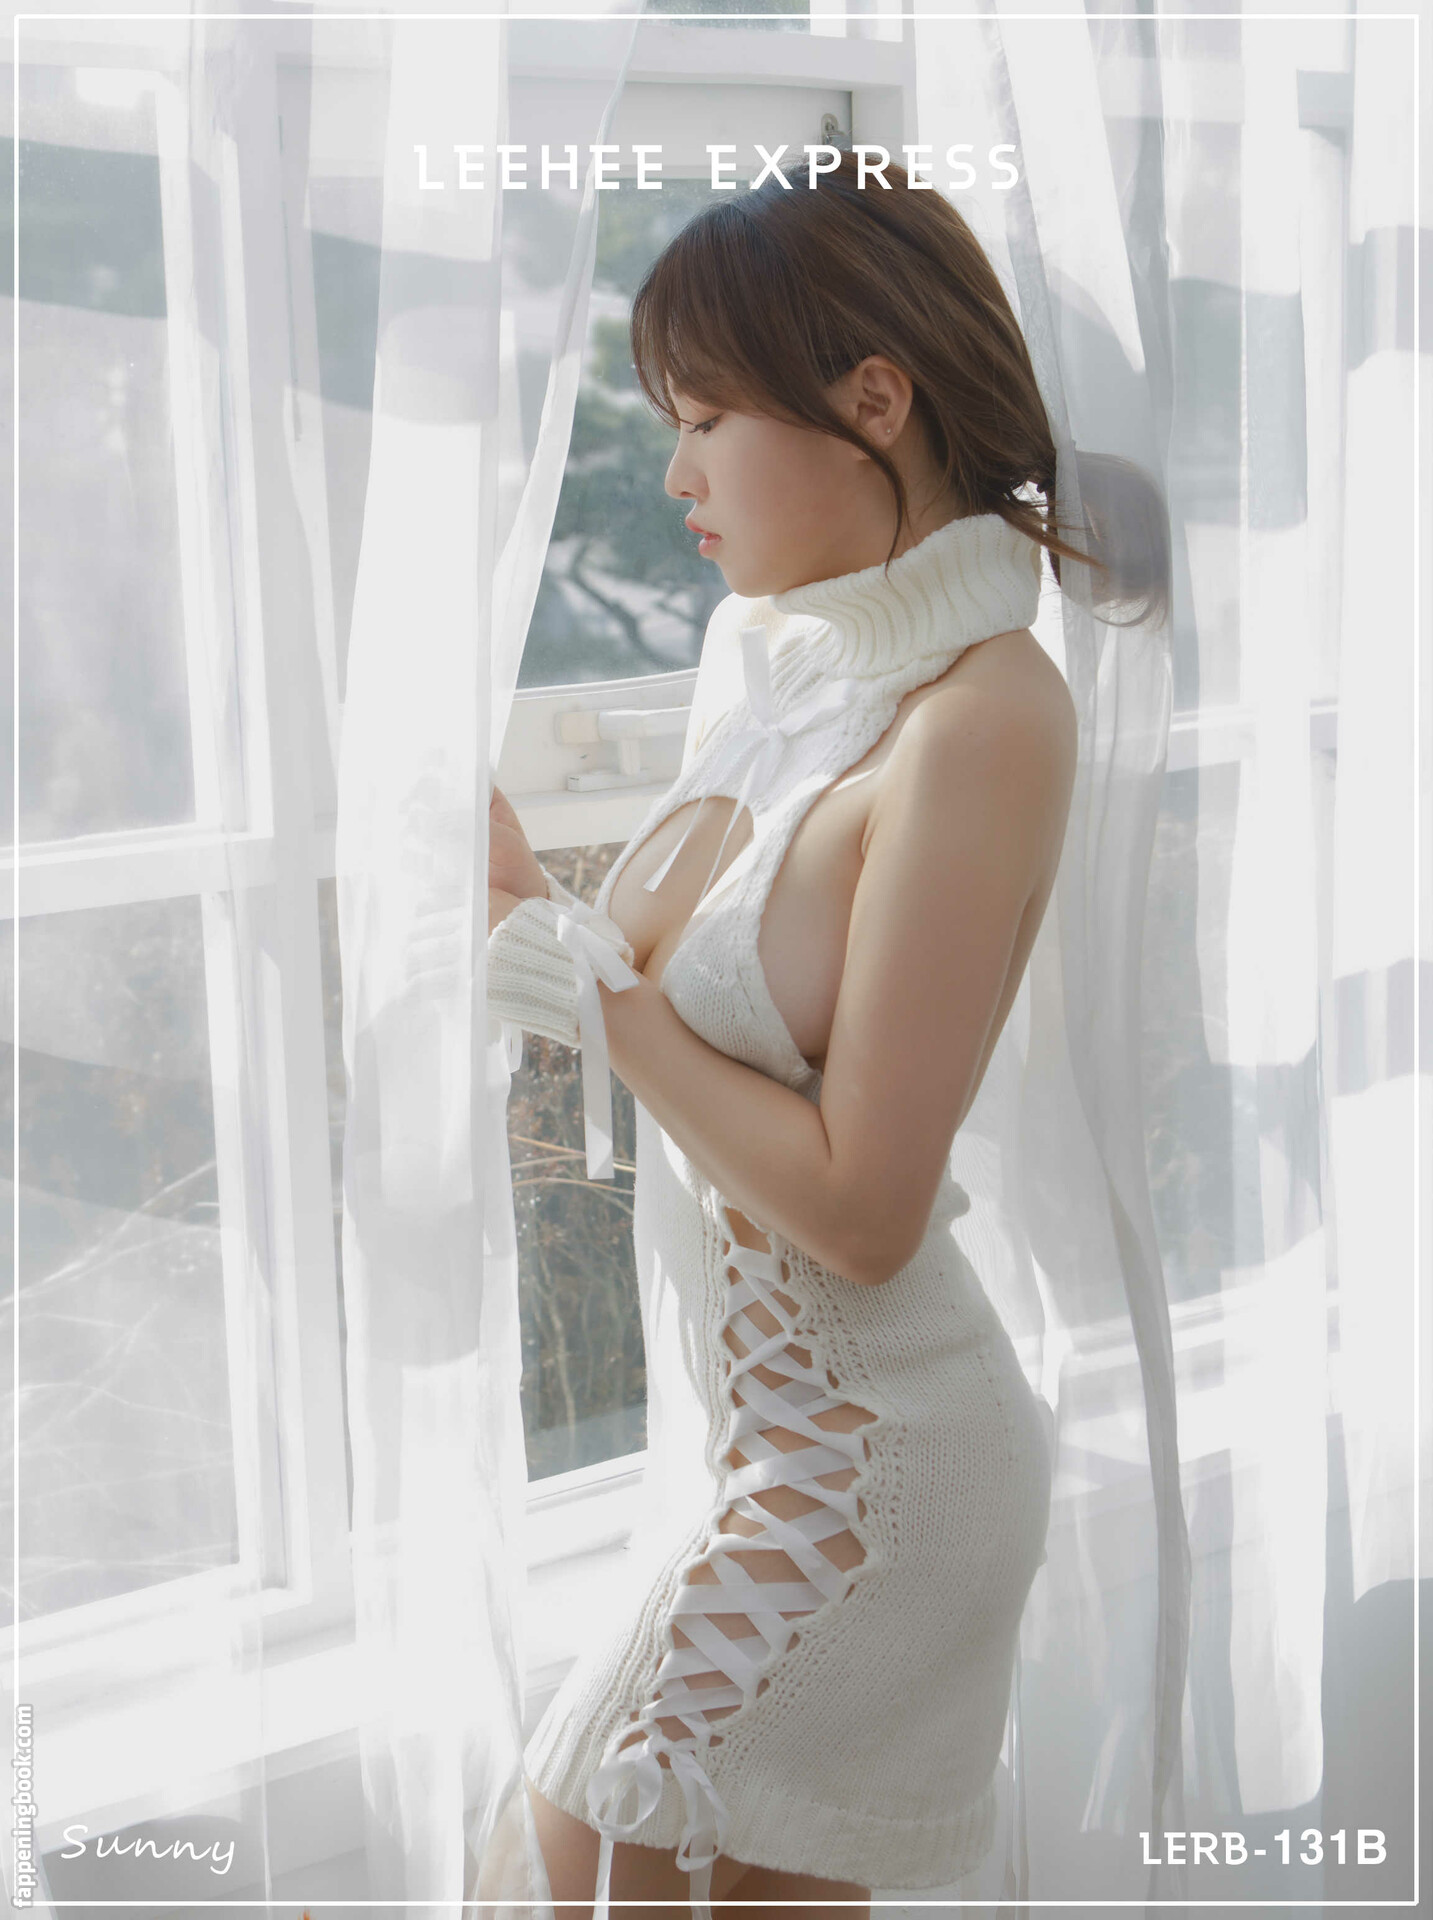 Leehee Express Nude The Fappening Photo Fappeningbook